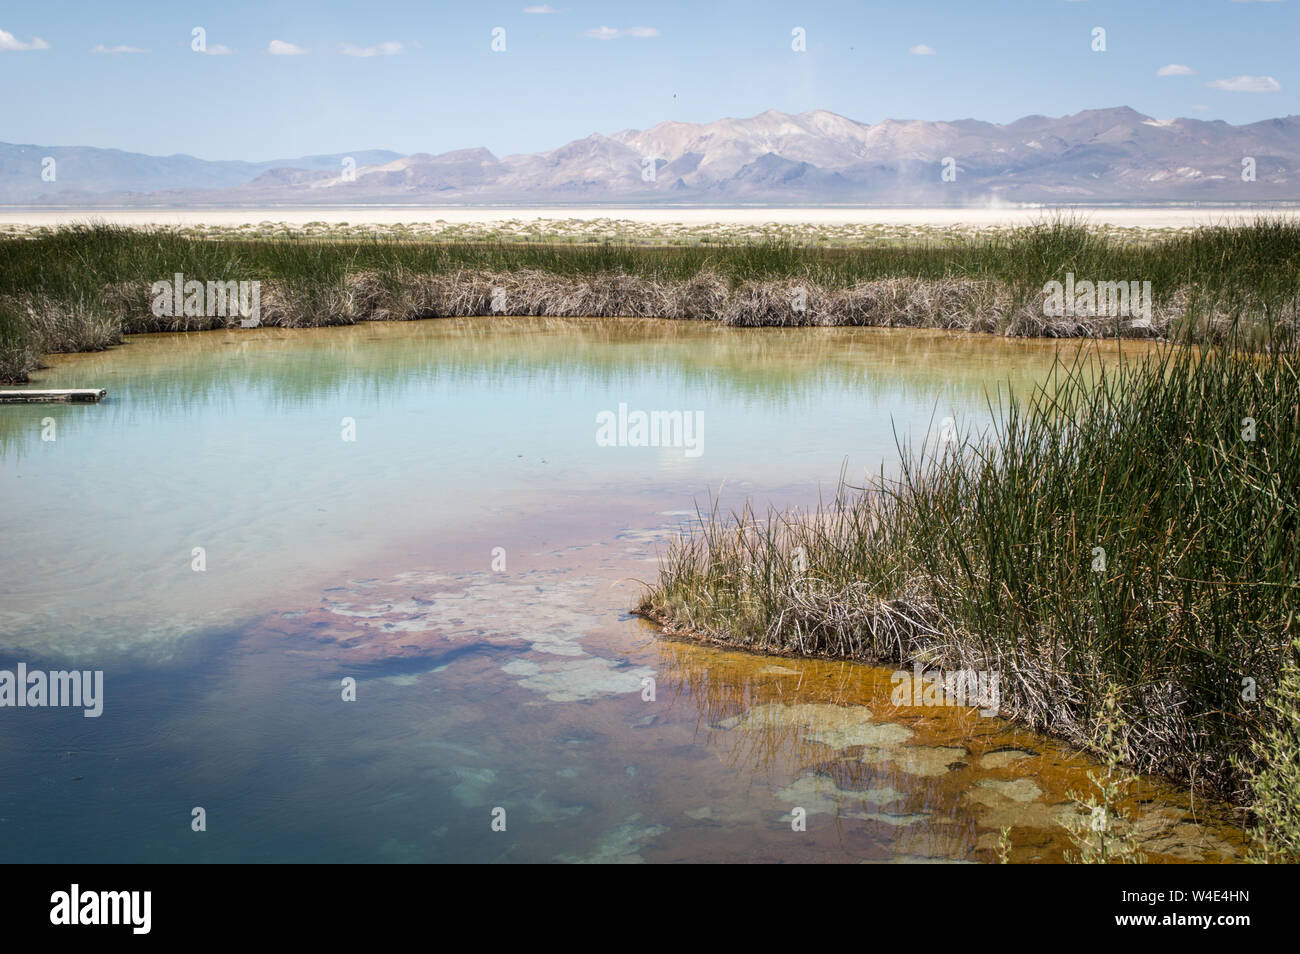 A view of the Black Rock Hot Spring near Gerlach, Nevada on a sunny day. Stock Photo